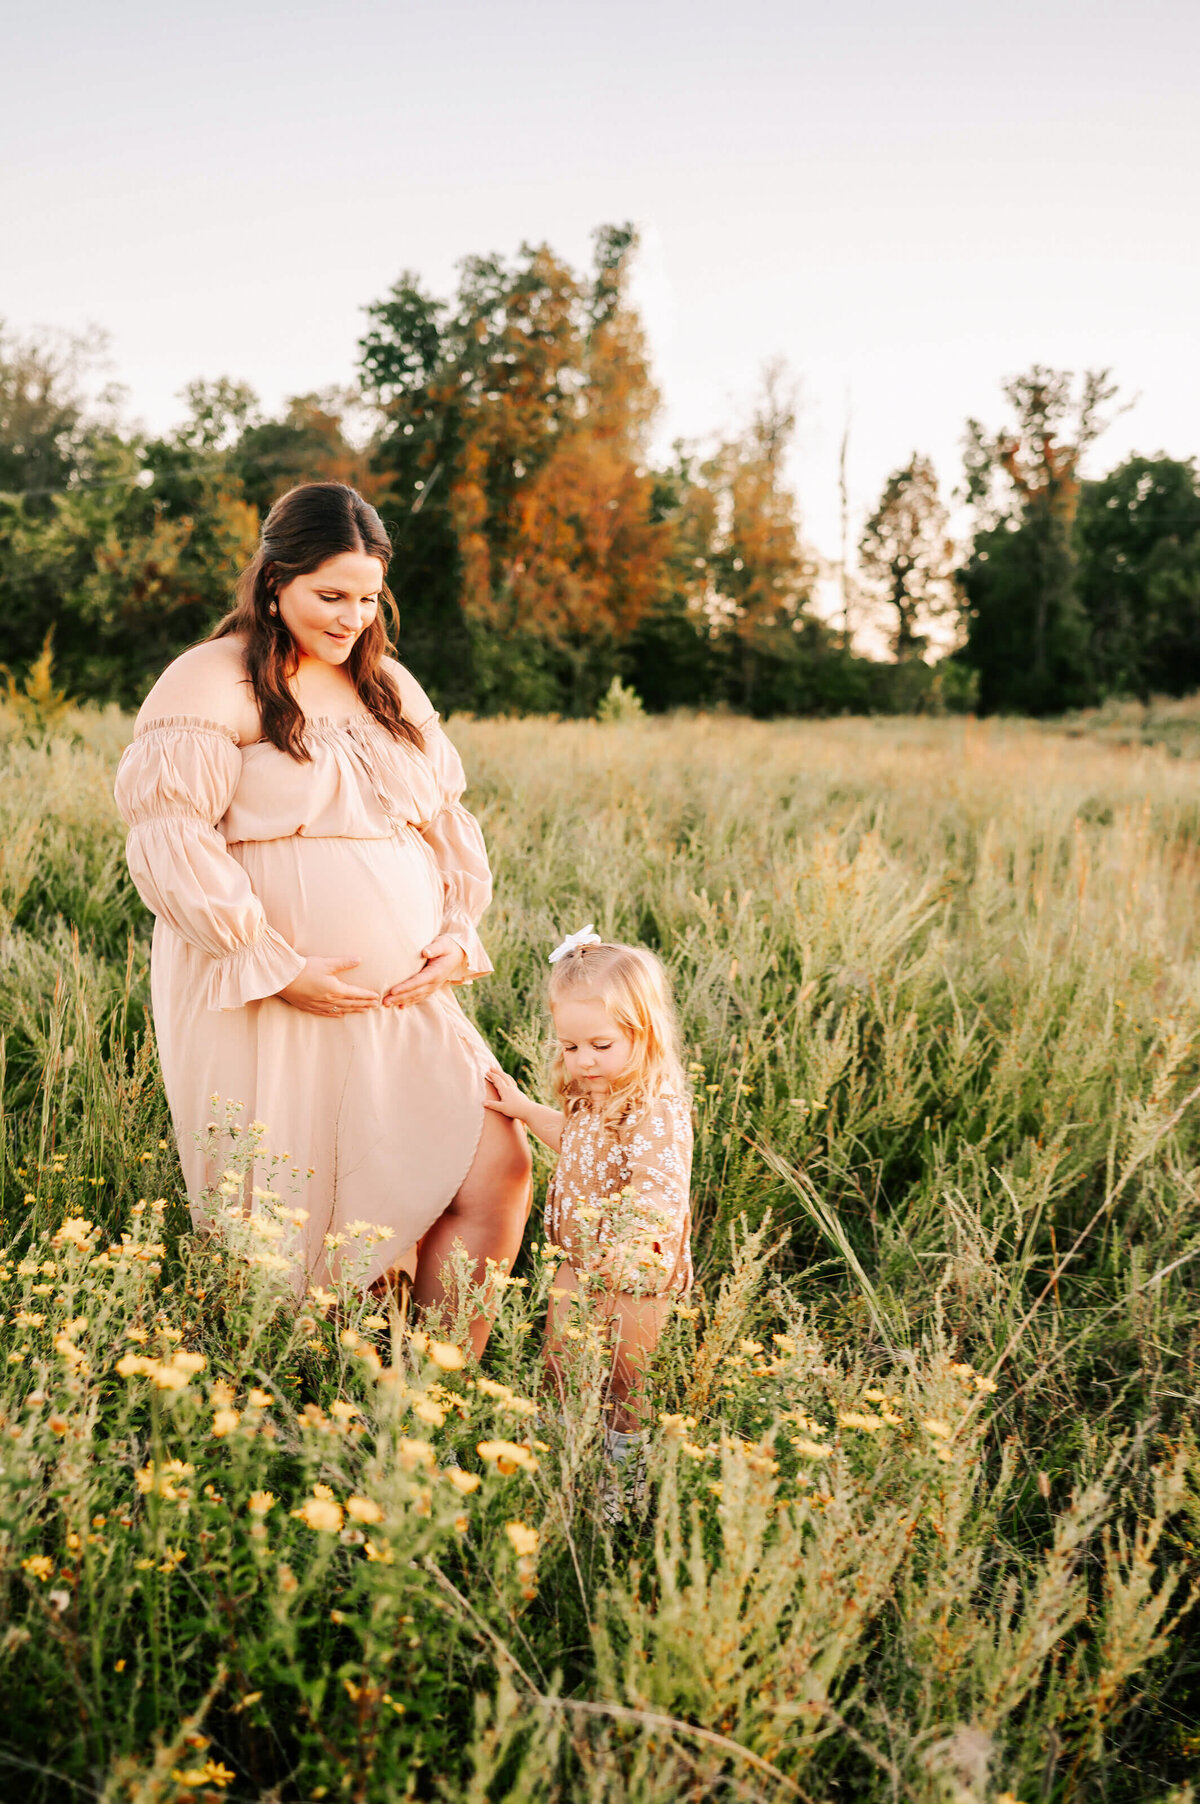 Springfield MO maternity photographer Jessica Kennedy of The XO Photography captures pregnant mom and toddler picking flowers in a field